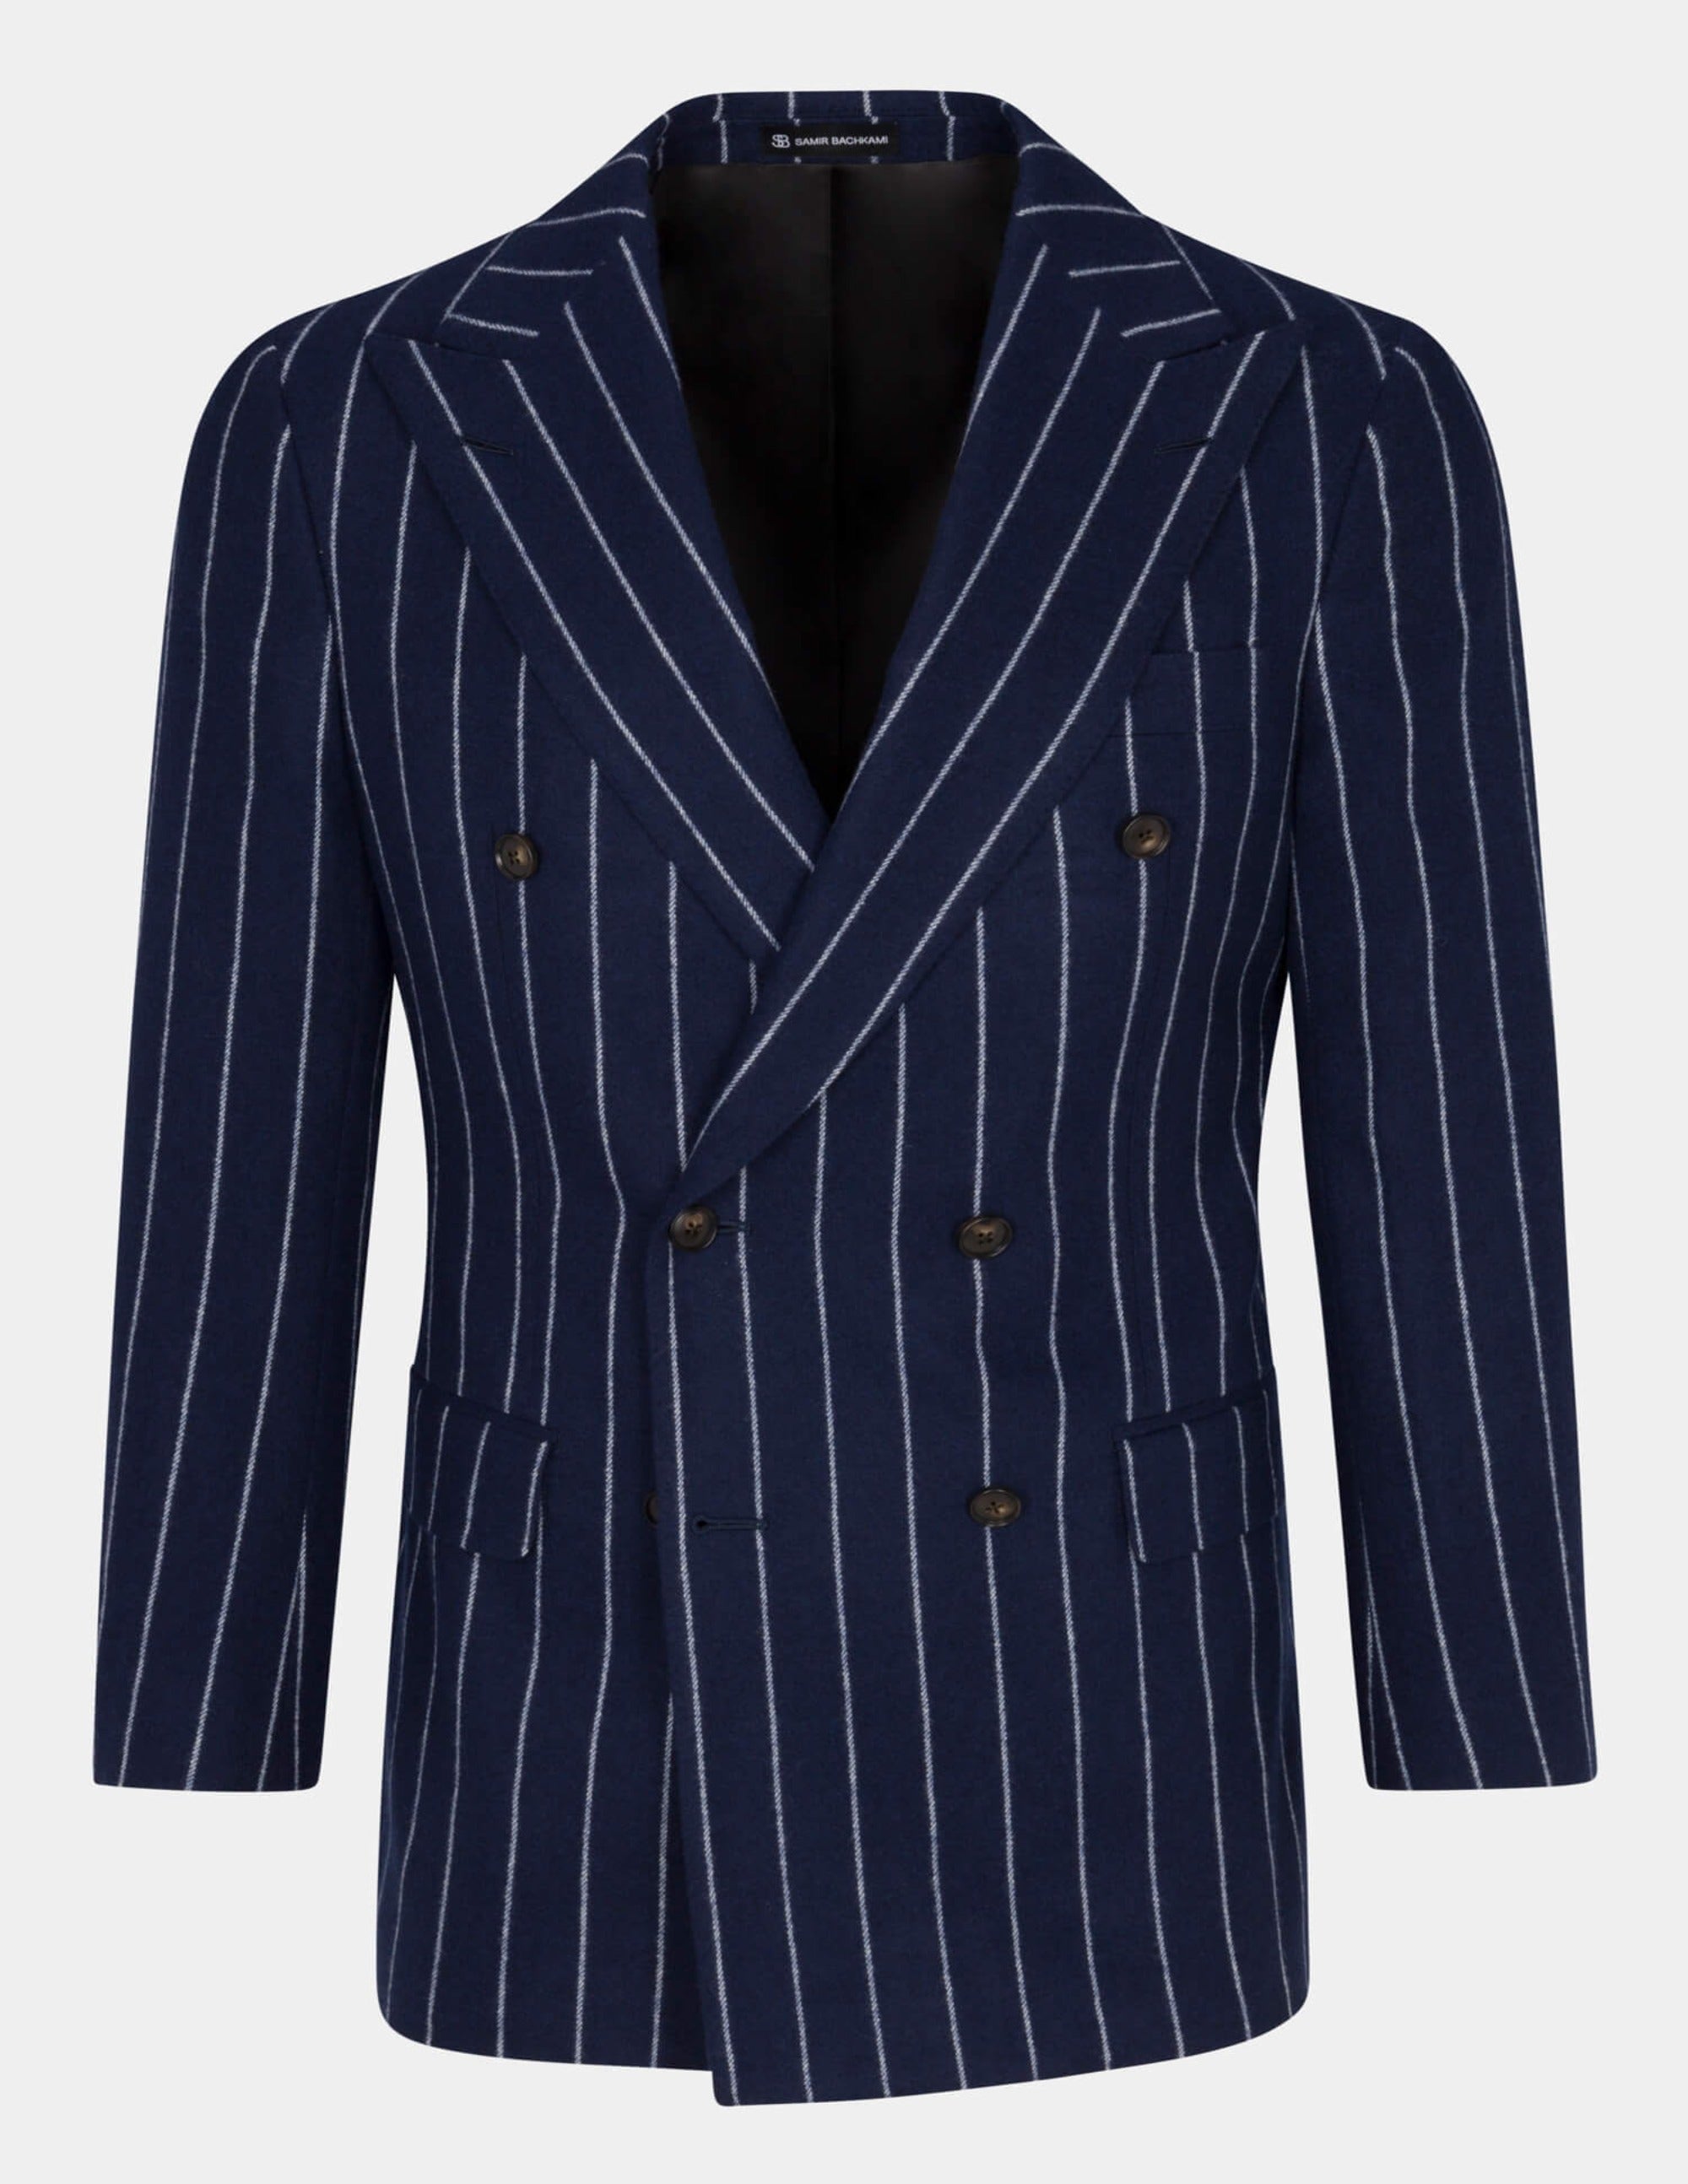 Navy White Stripe Double Breasted Suit - Samir Bachkami